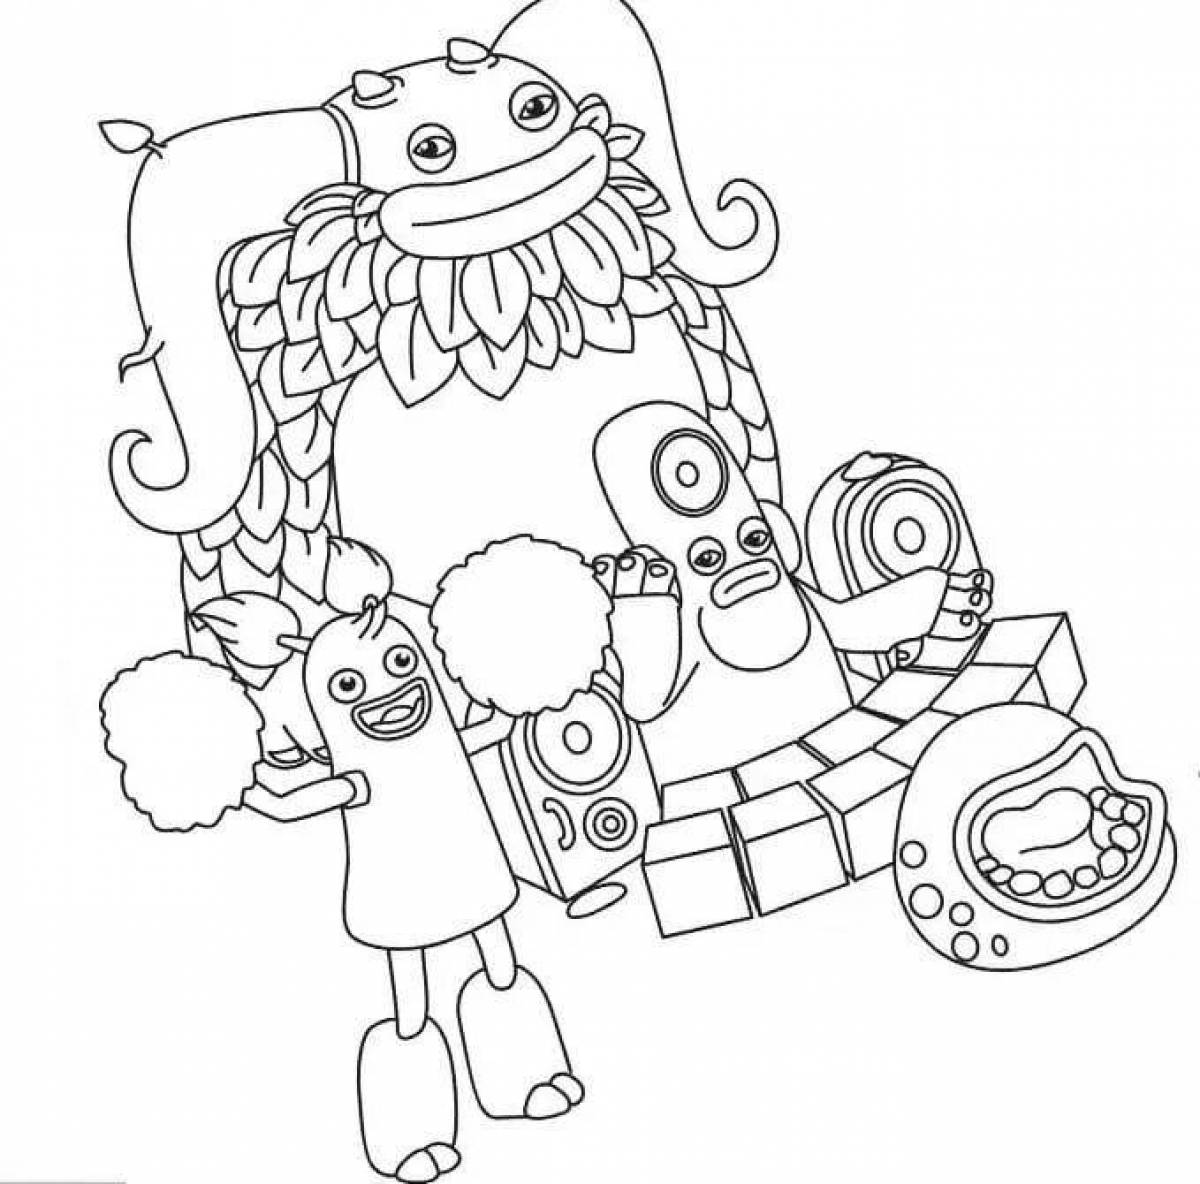 Fun coloring pages with singing monsters for kids